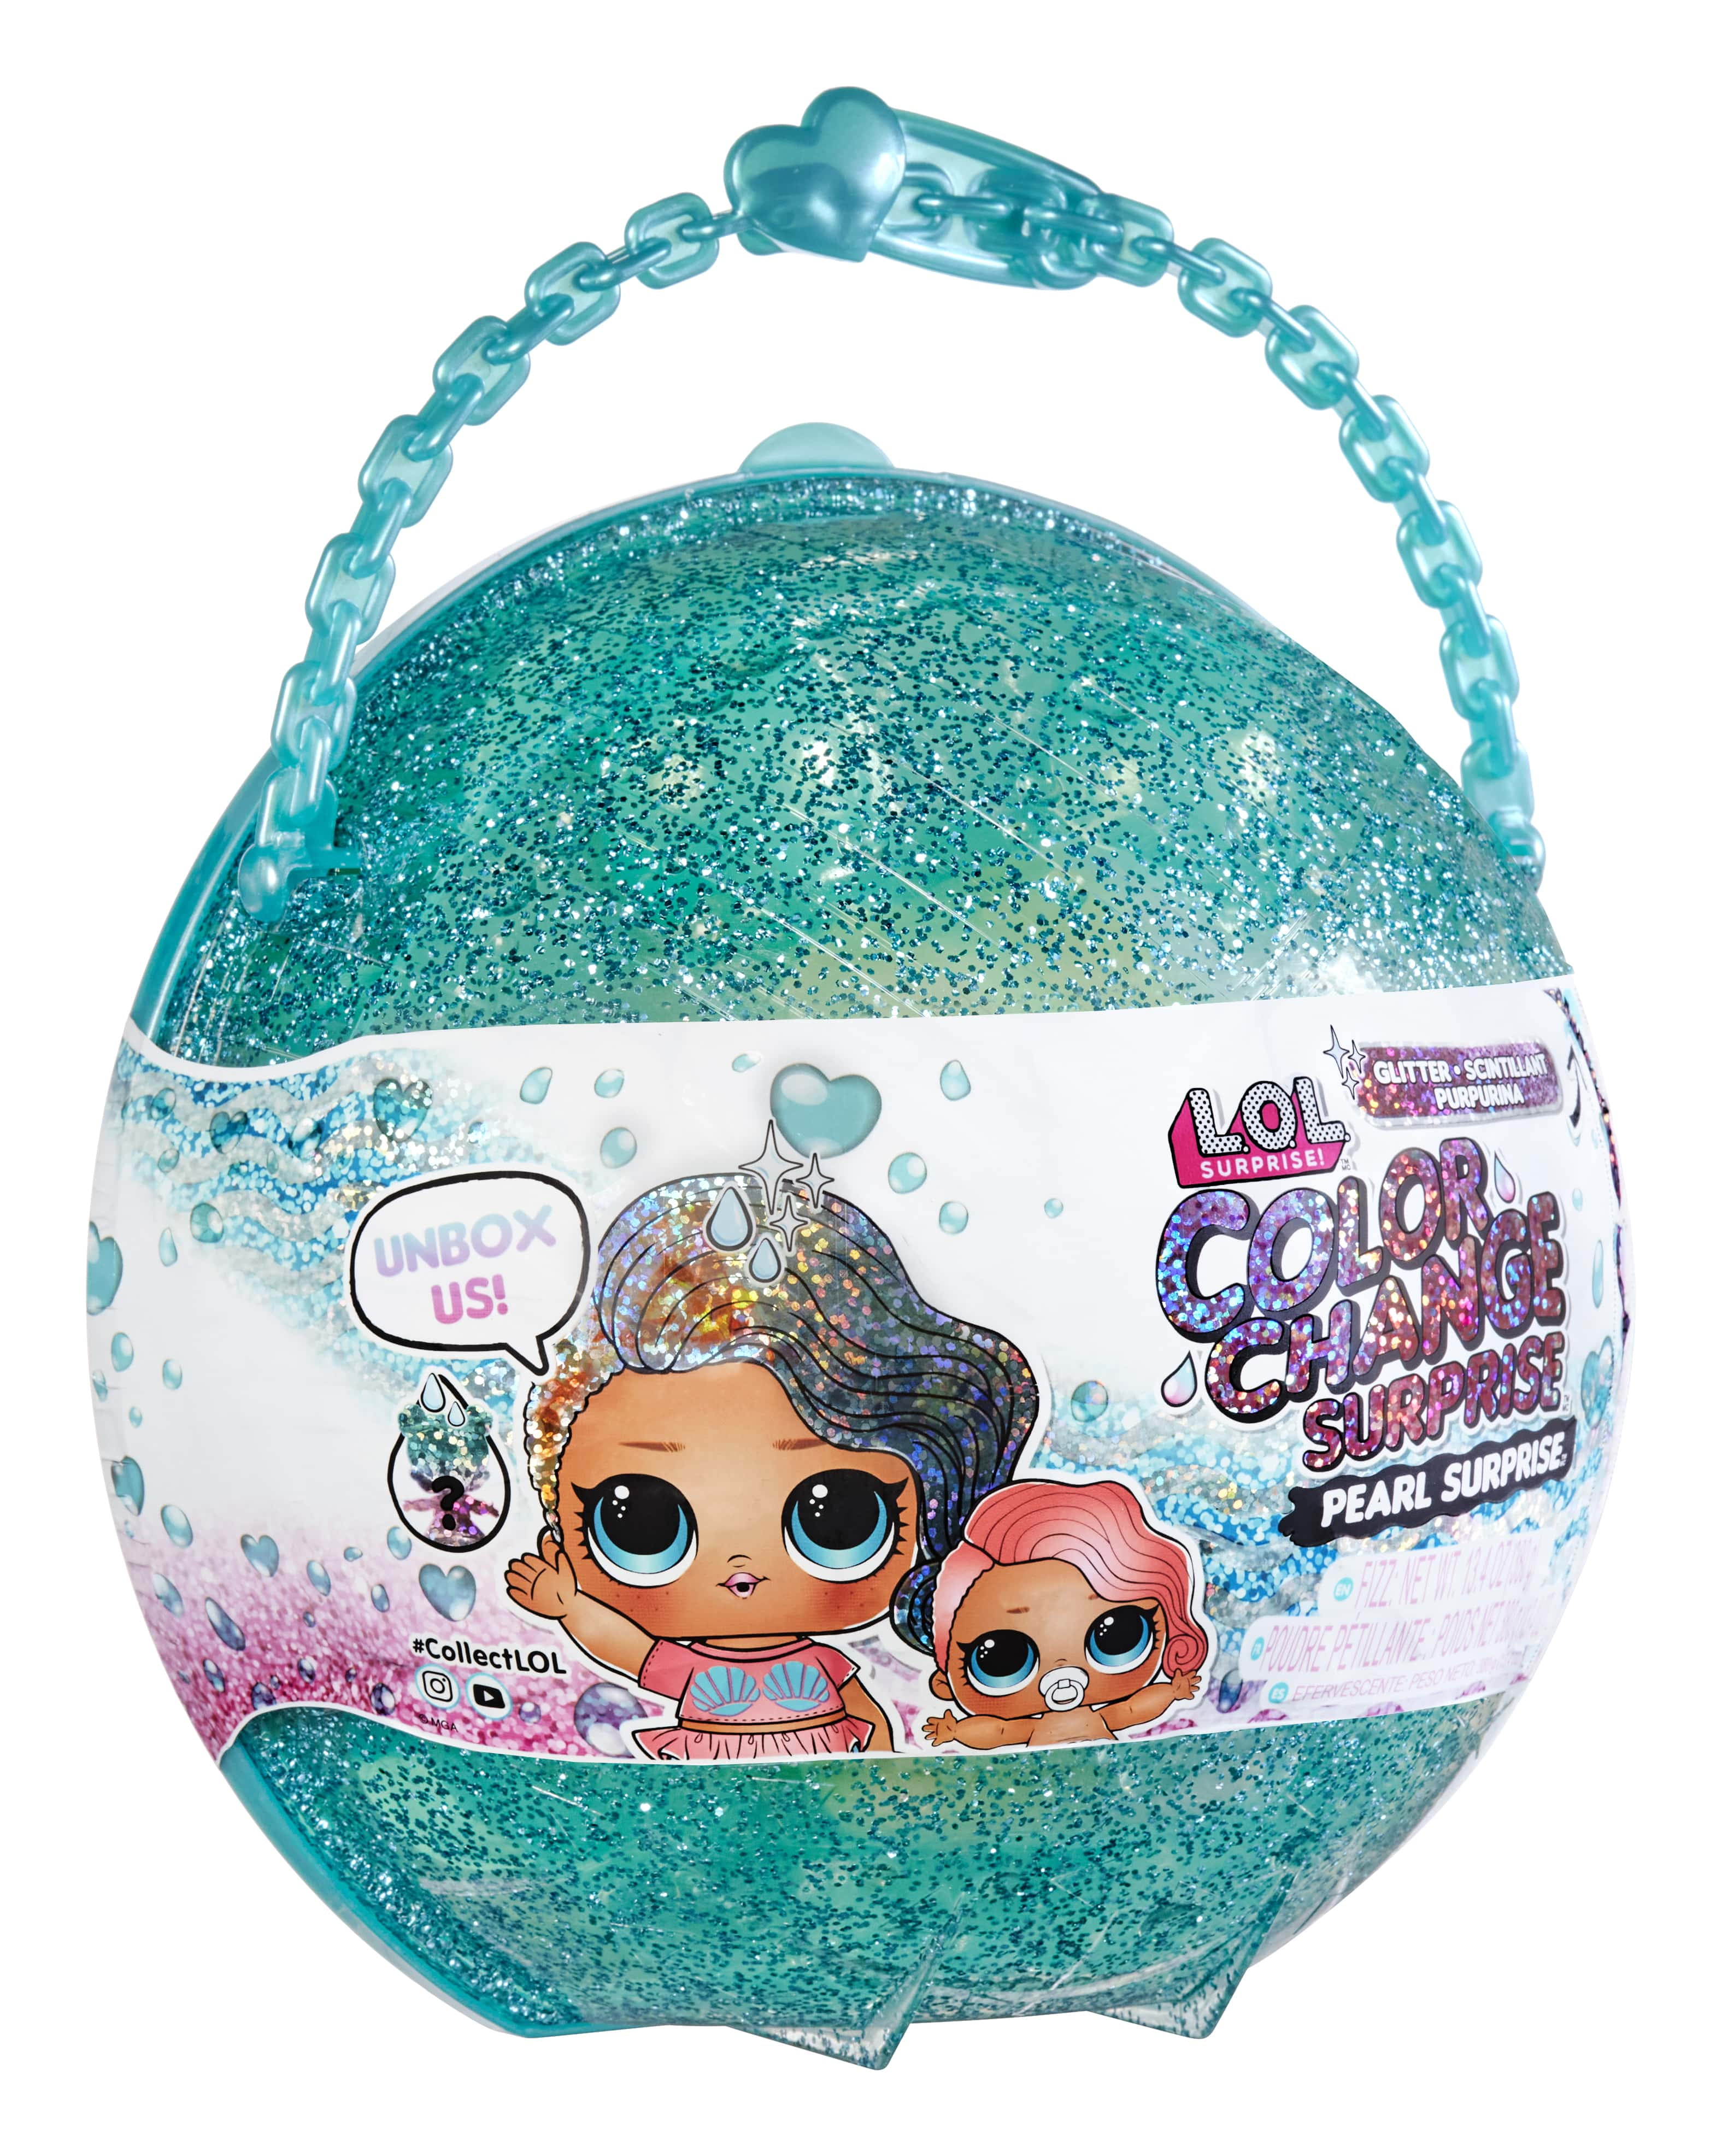 L.O.L Surprise! LOL Surprise Glitter Color Change ™ Pearl Surprise with 6 Surprises and an Exclusive Doll and Lil Sister, Interactive Playset - Great Gift for Kids Ages 4+ Colors May Vary